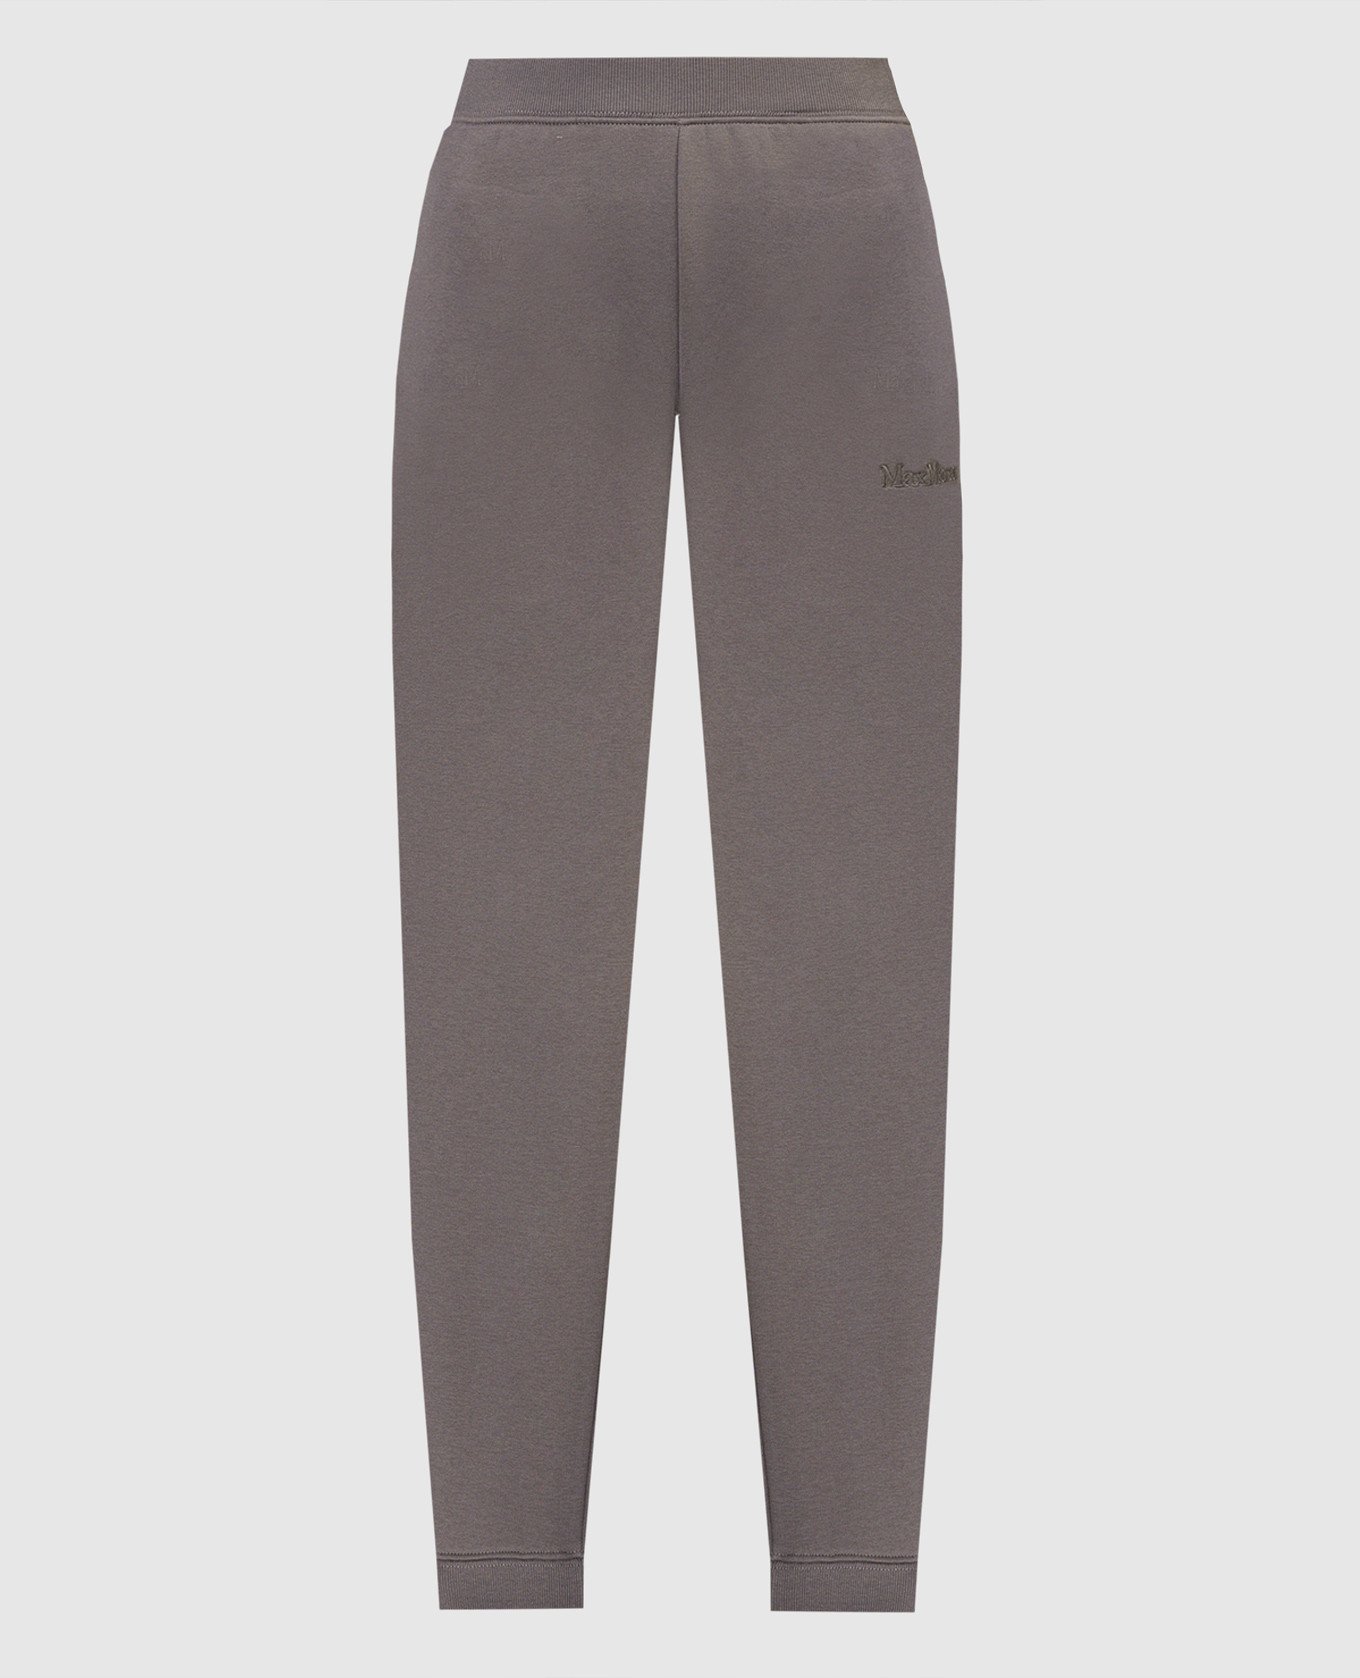 Tamaro joggers in gray with logo embroidery